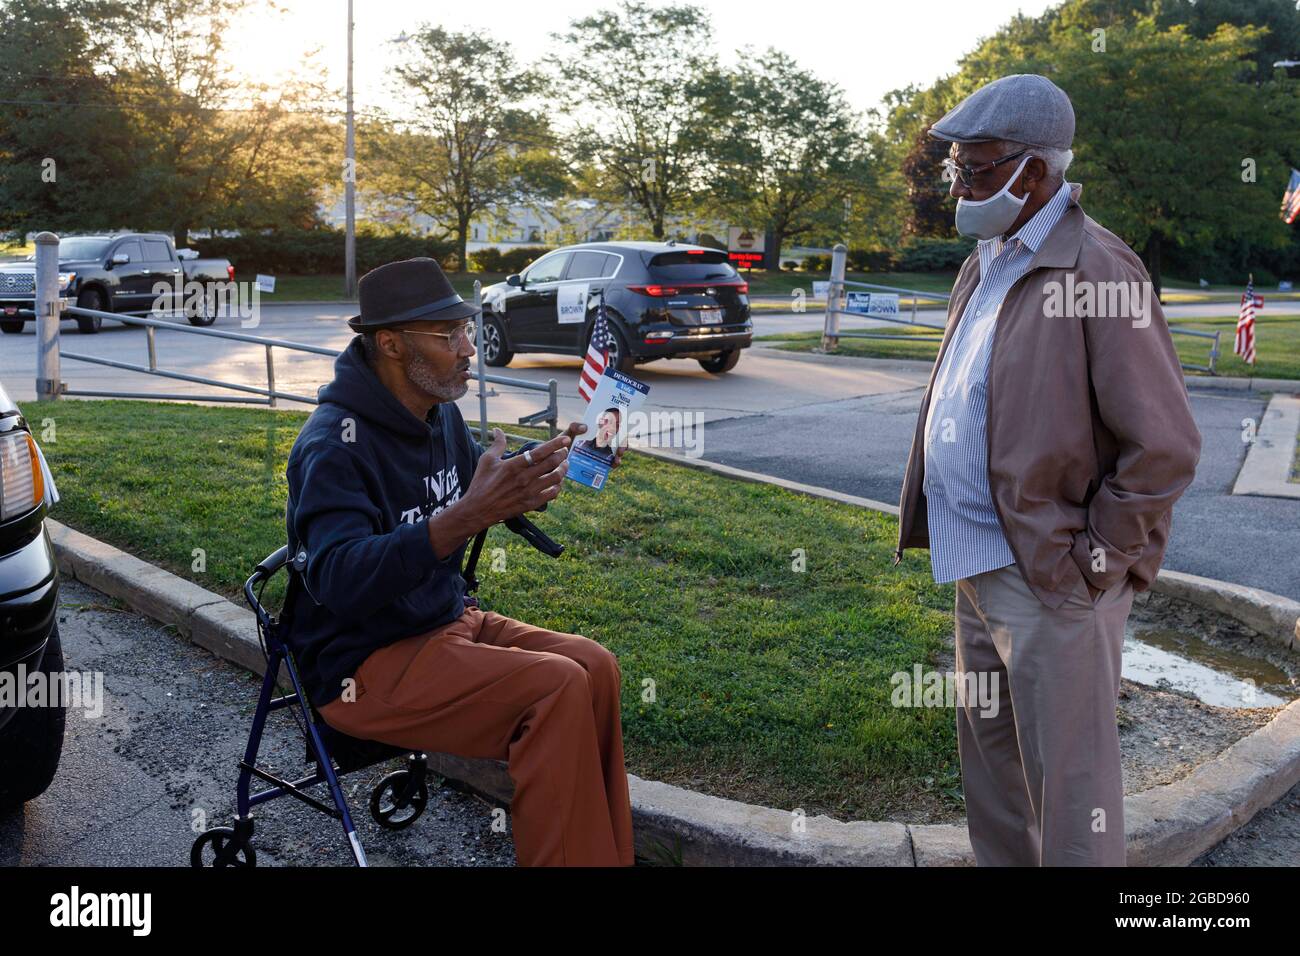 Erwin Johnson, 61, of Cleveland, Ohio talks to a voter outside of the polling place at Warrensville Heights Recreation Center. Johnson came to show support for Nina Turner because, “I think she's the best candidate. She's been a state rep, She's the most qualified.” Voters came out to the polls for a special election in Ohio's 11th district. The two main leading candidates for this House of Representatives seat are two Democrats, Nina Turner, a progressive candidate, and Shontel Brown, who represents the traditional Democratic establishment. Stock Photo